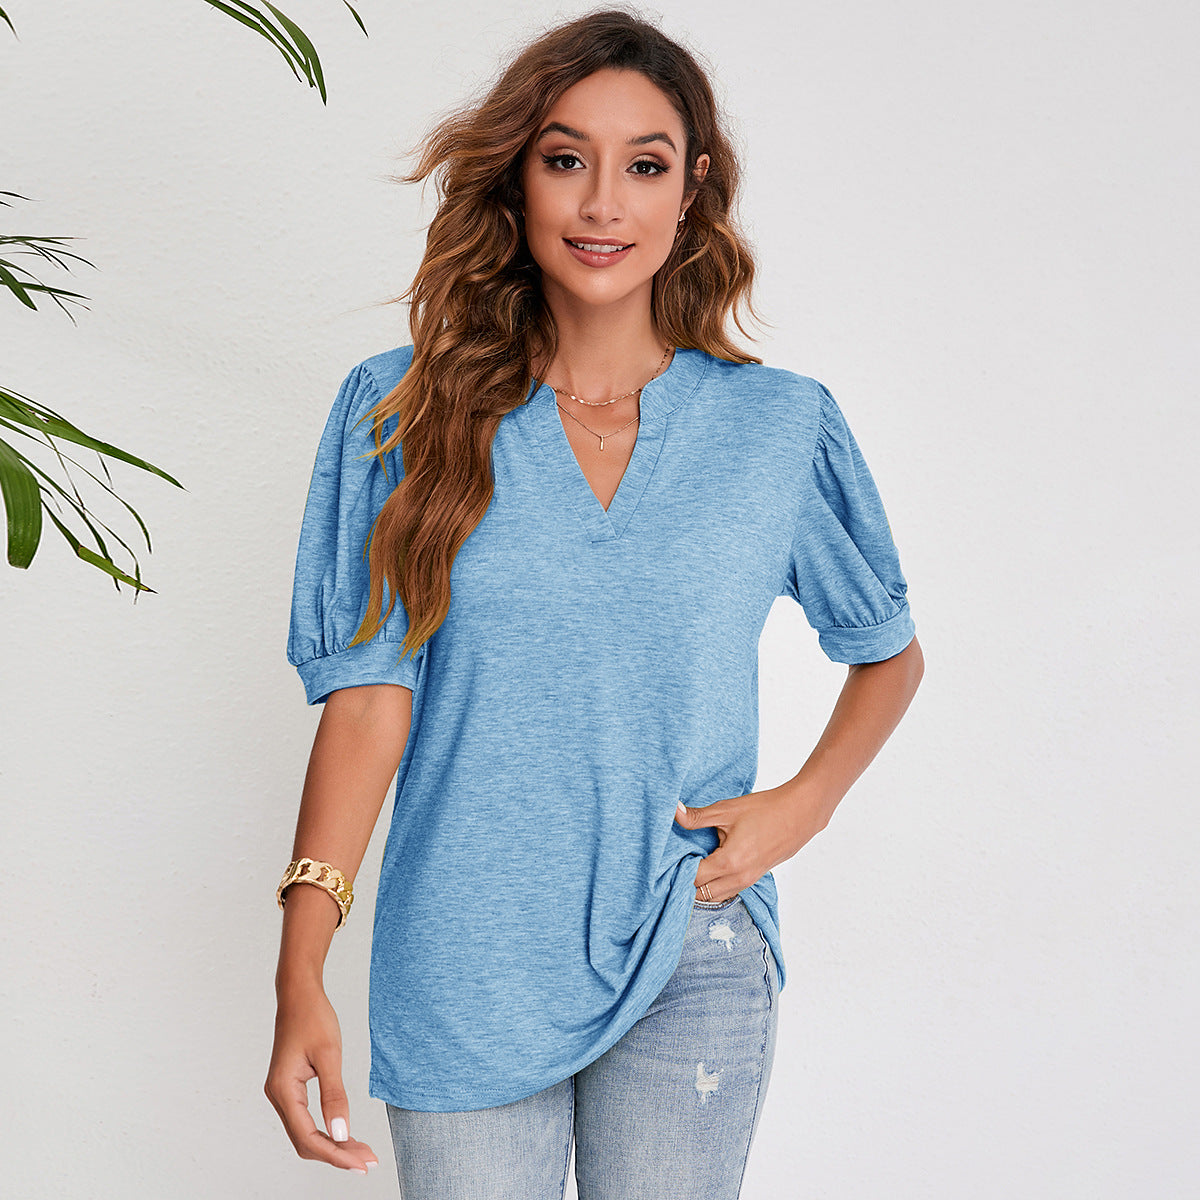 Women's Summer Casual V-neck Solid Color Puff Sleeve Loose Tops